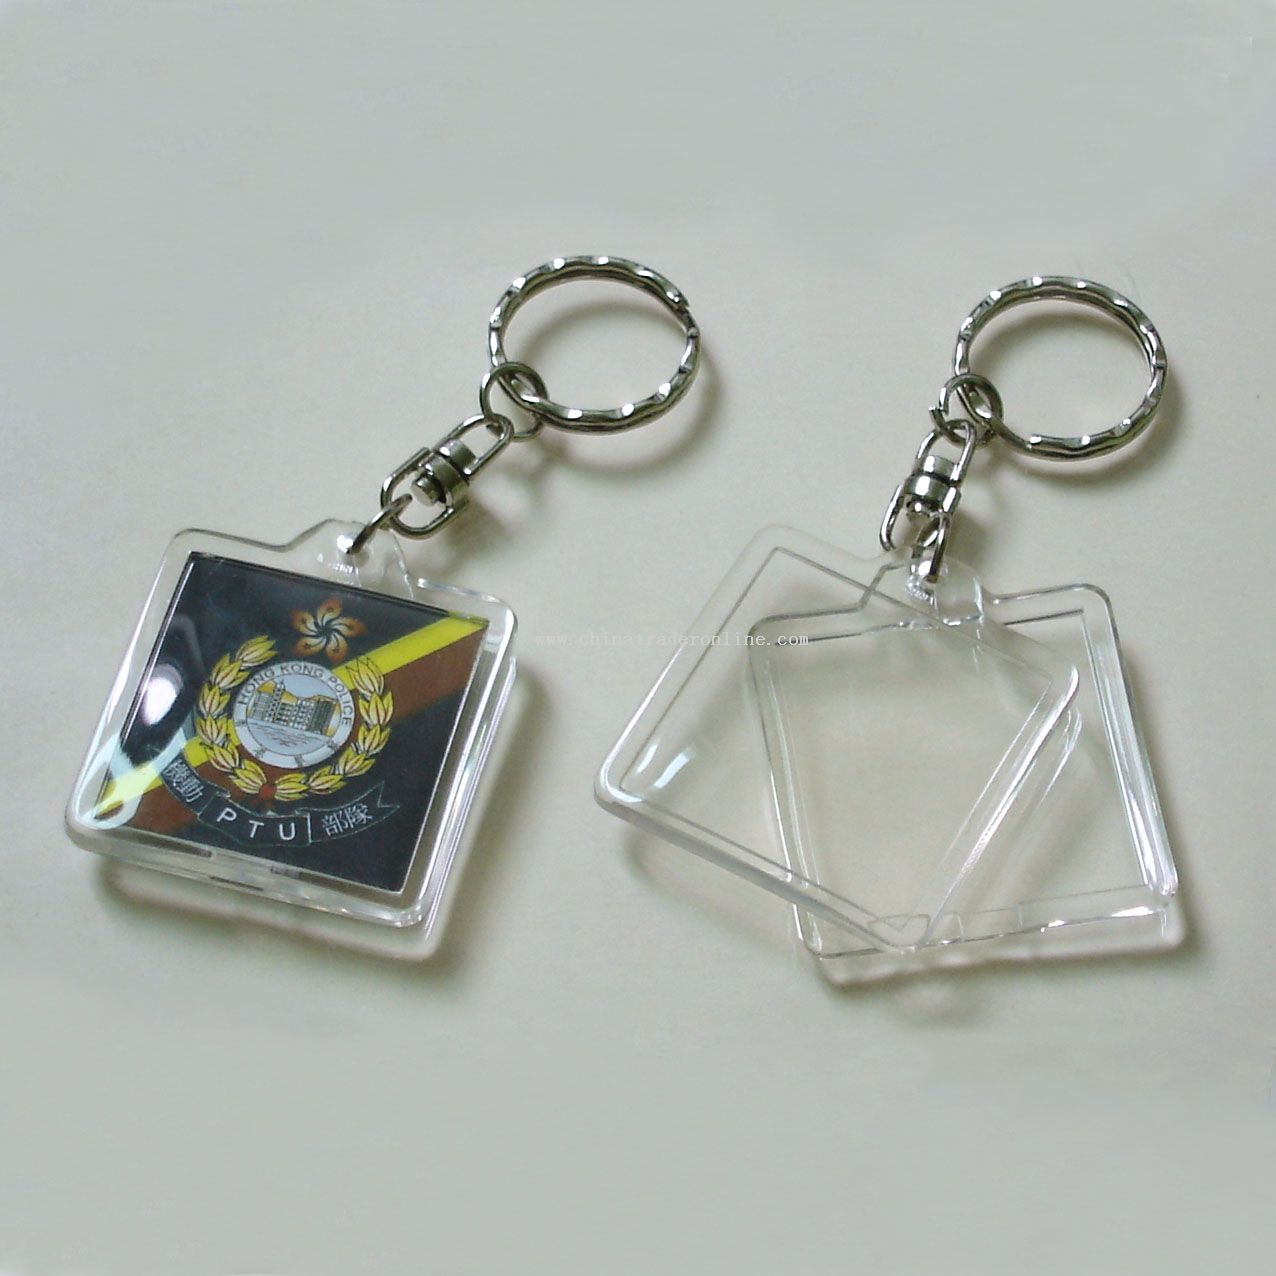 Acrylic keychain with cover